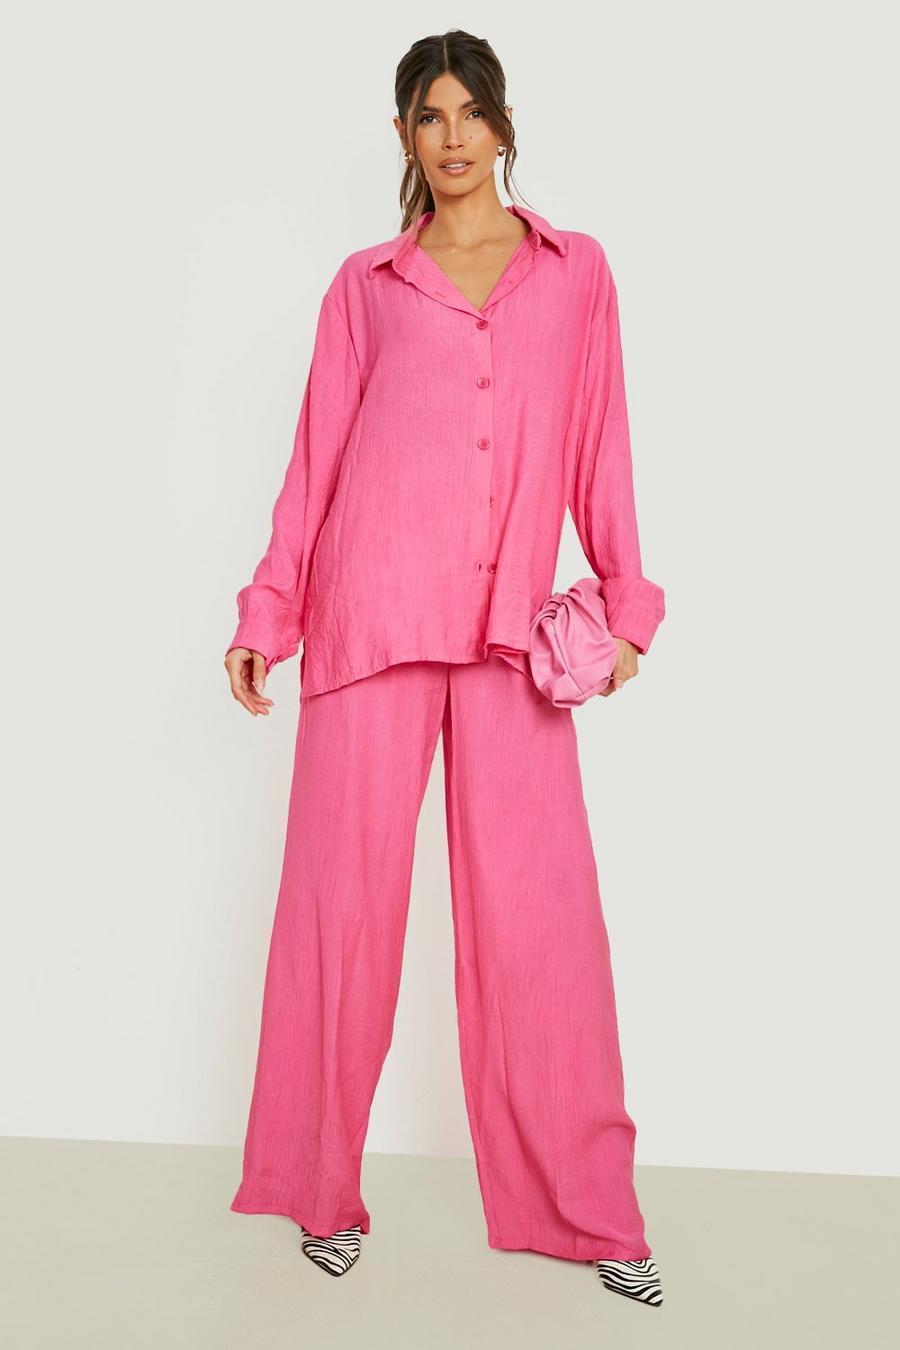 Hot pink rosa Crinkle Relaxed Fit Linen Look Shirt 